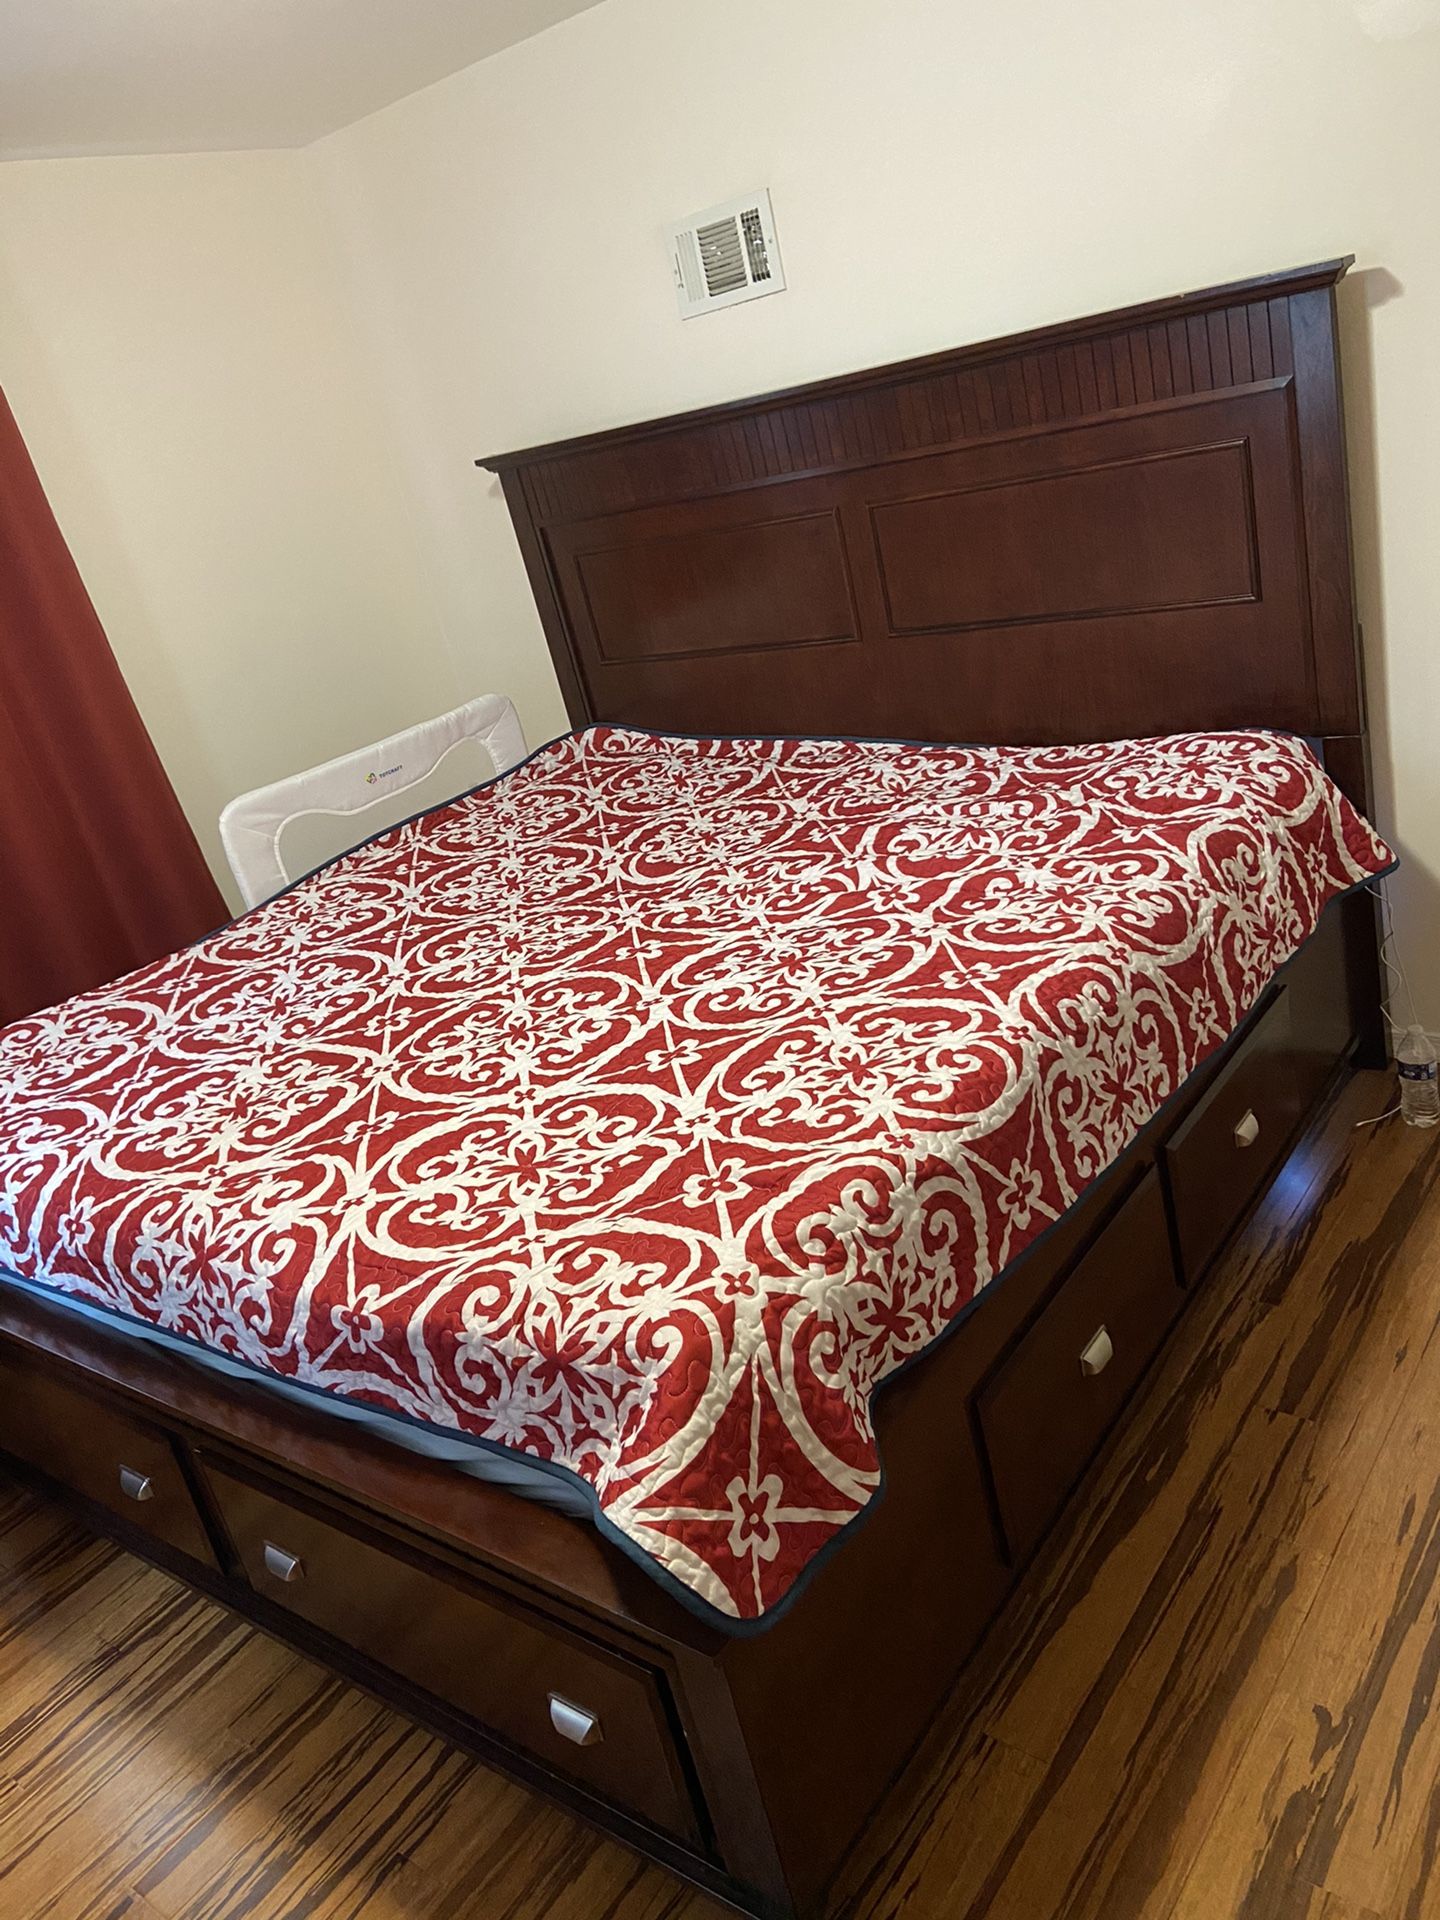 King size bed frame with drawers